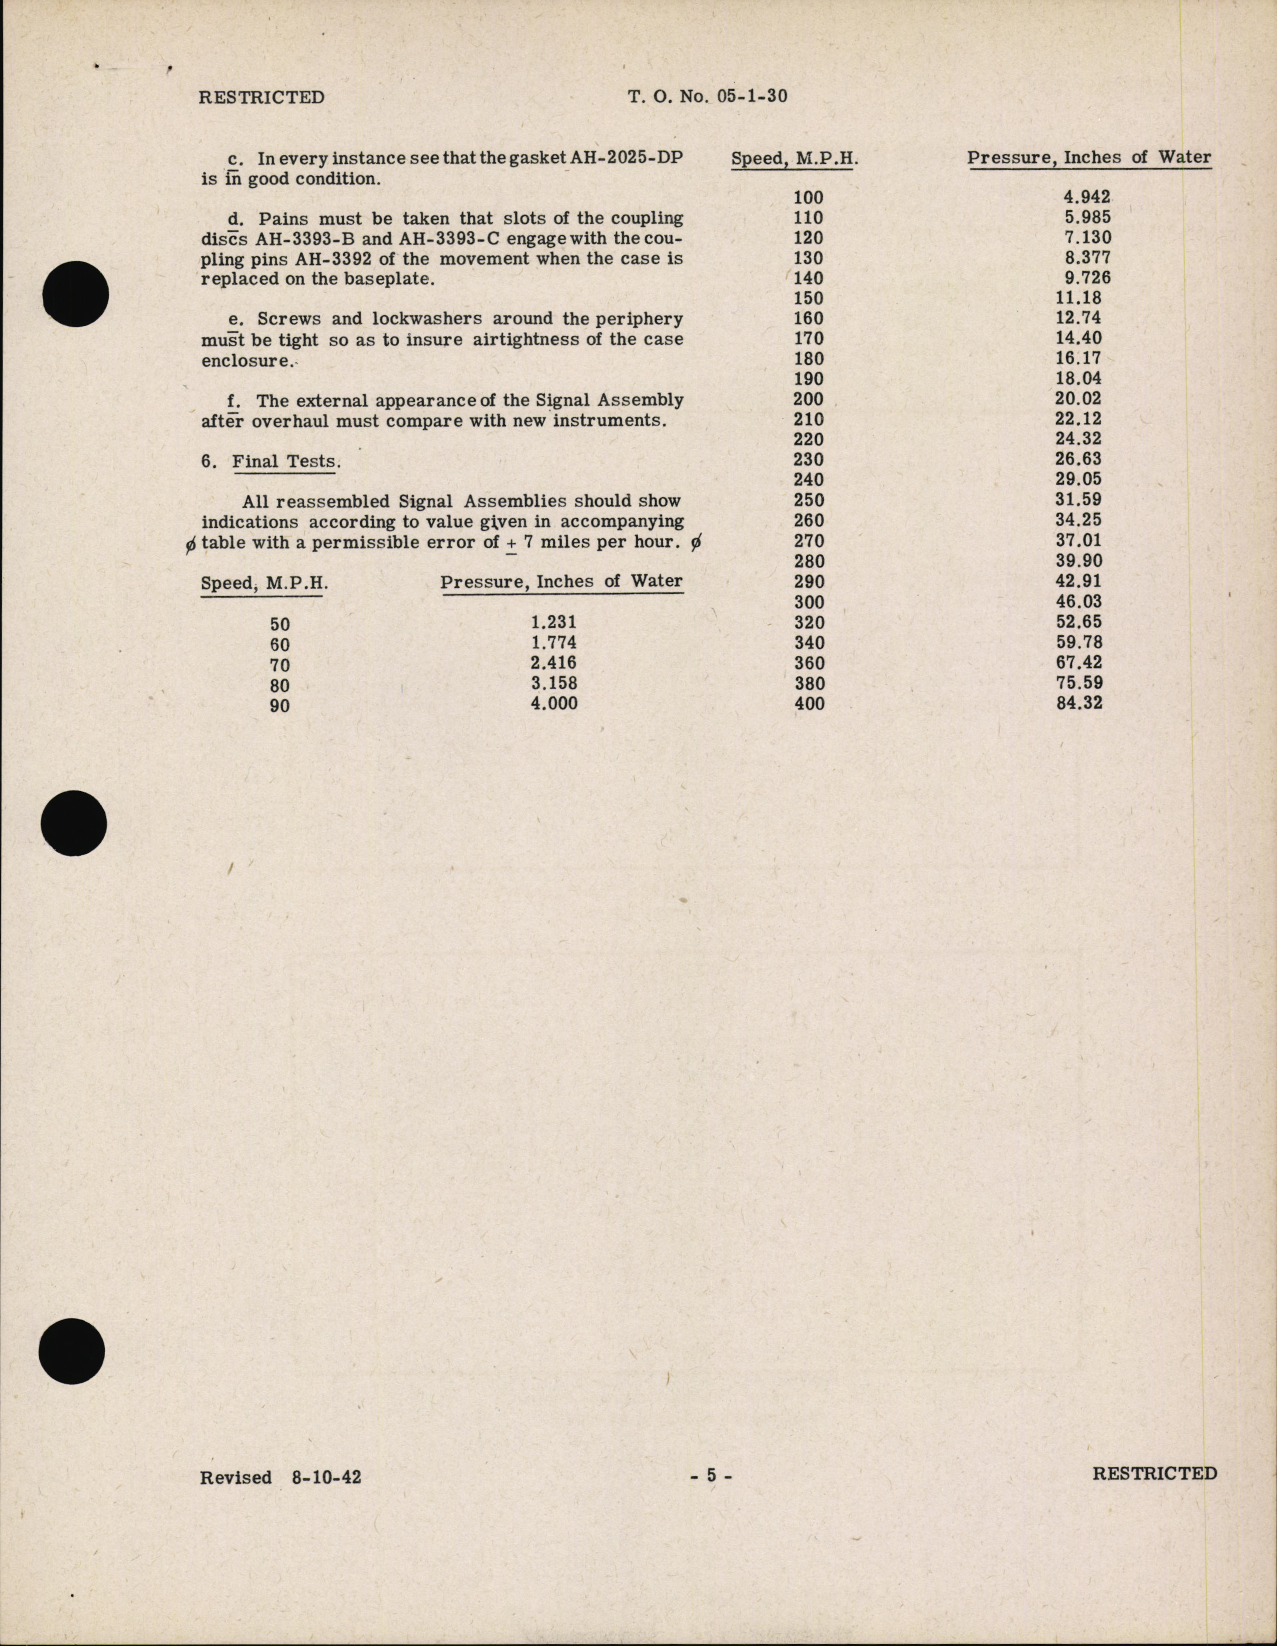 Sample page 7 from AirCorps Library document: Handbook of Instructions with Parts Catalog for Stalling Speed Signal Assembly